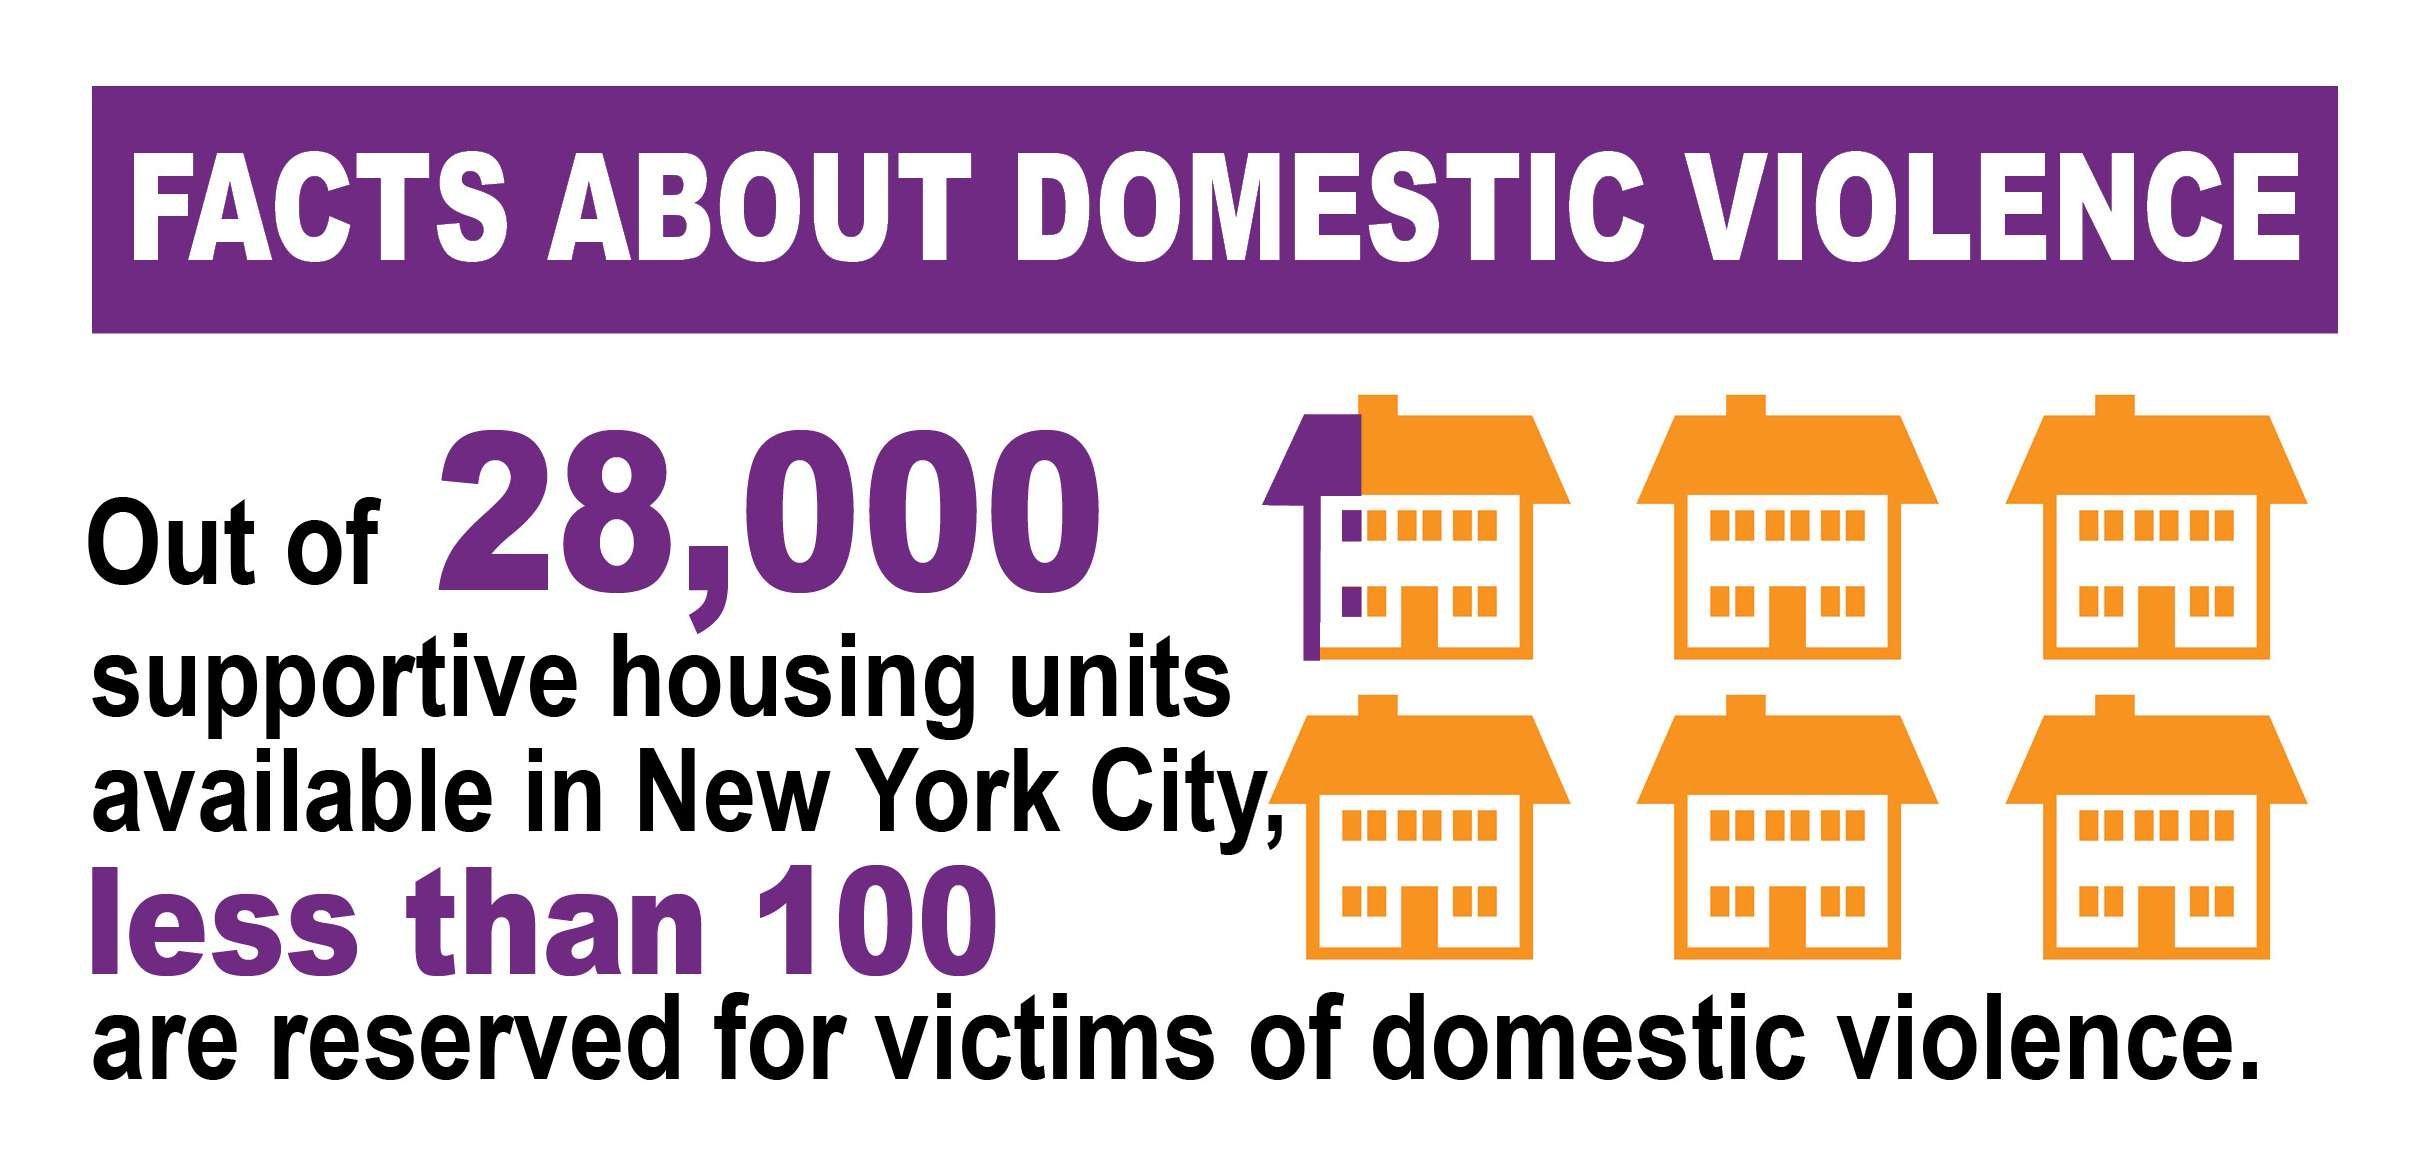 How to hide ownership of real estate car domestic violence victims